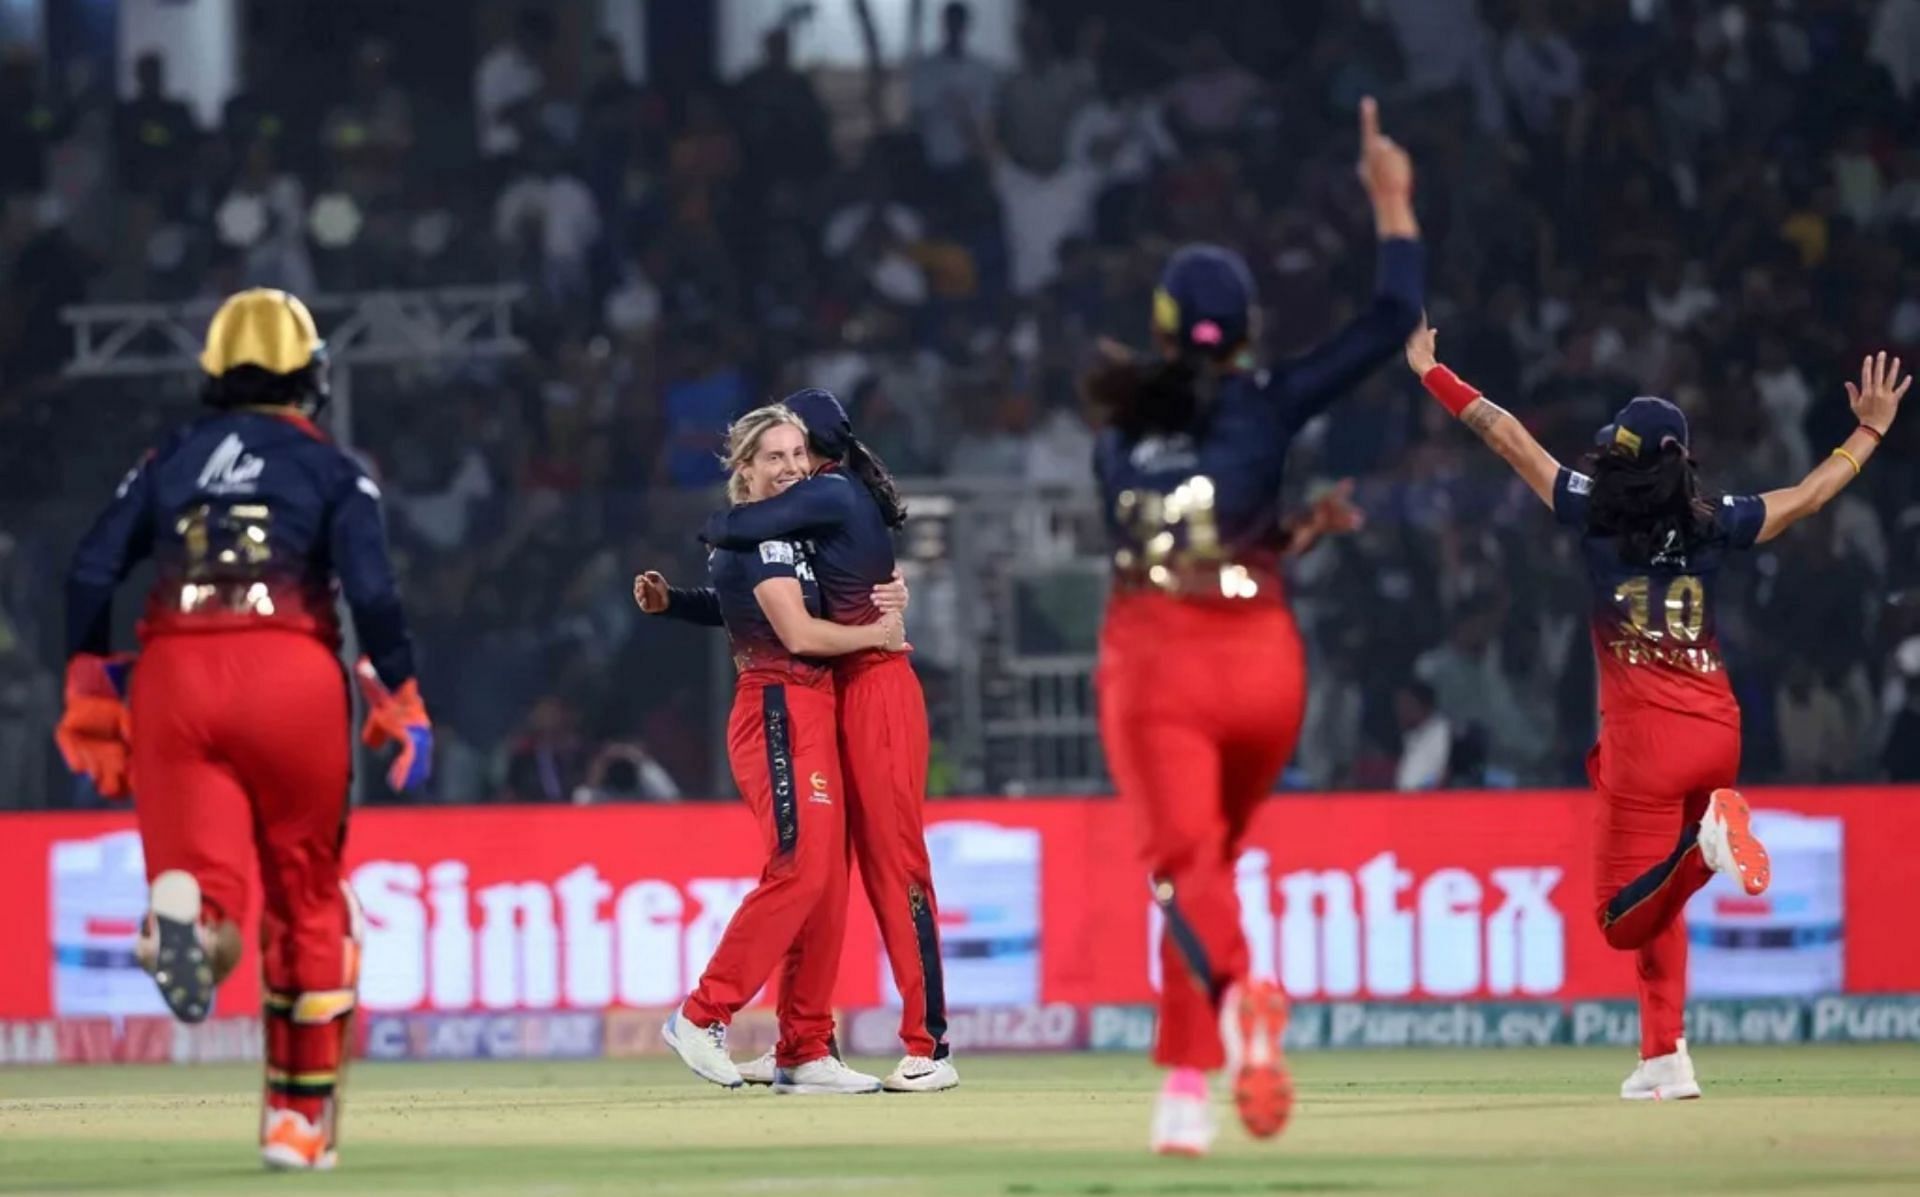 Sophie Molineux celebrating a wicket with her teammates. 